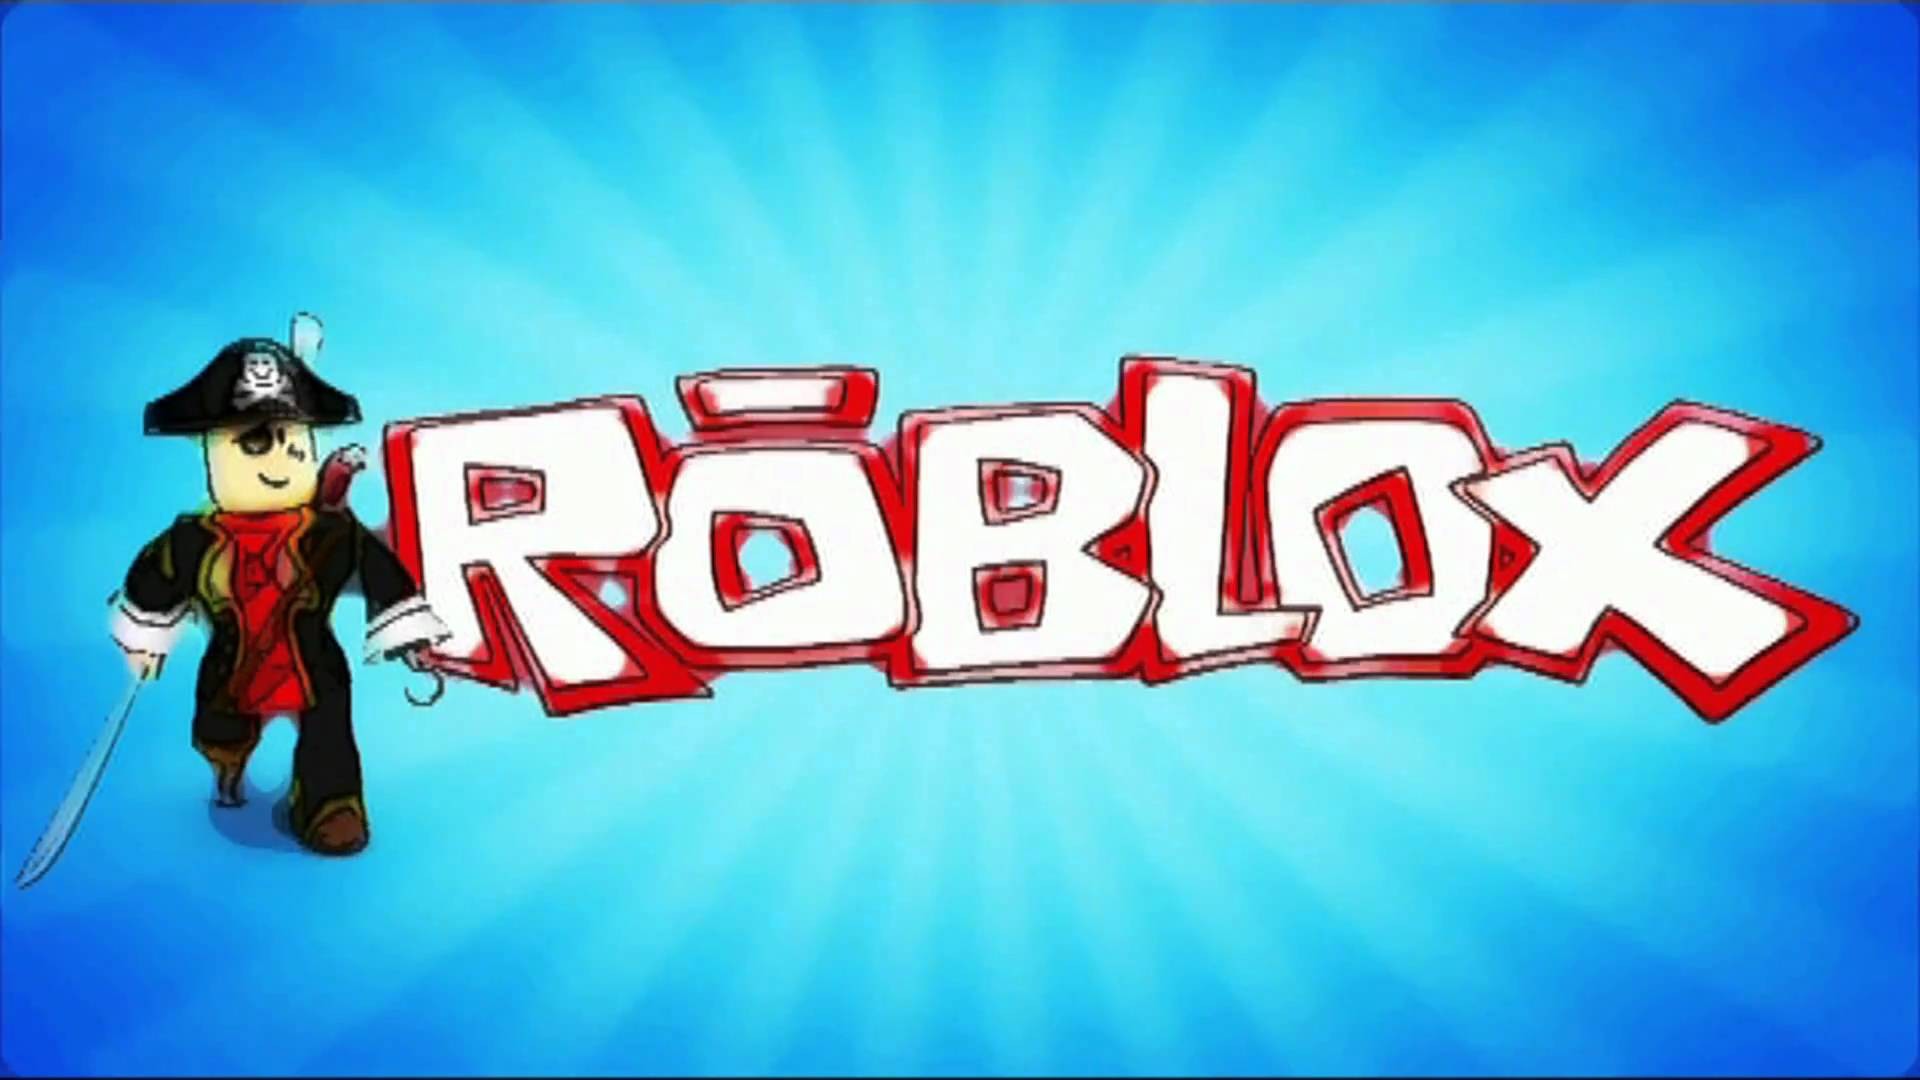 Insane Roblox Background Download Free Beautiful Hd Backgrounds For Desktop Mobile Laptop In Any 4k Lock Screen Huge Free Wallpaper Download - how to get a custom roblox background mobile